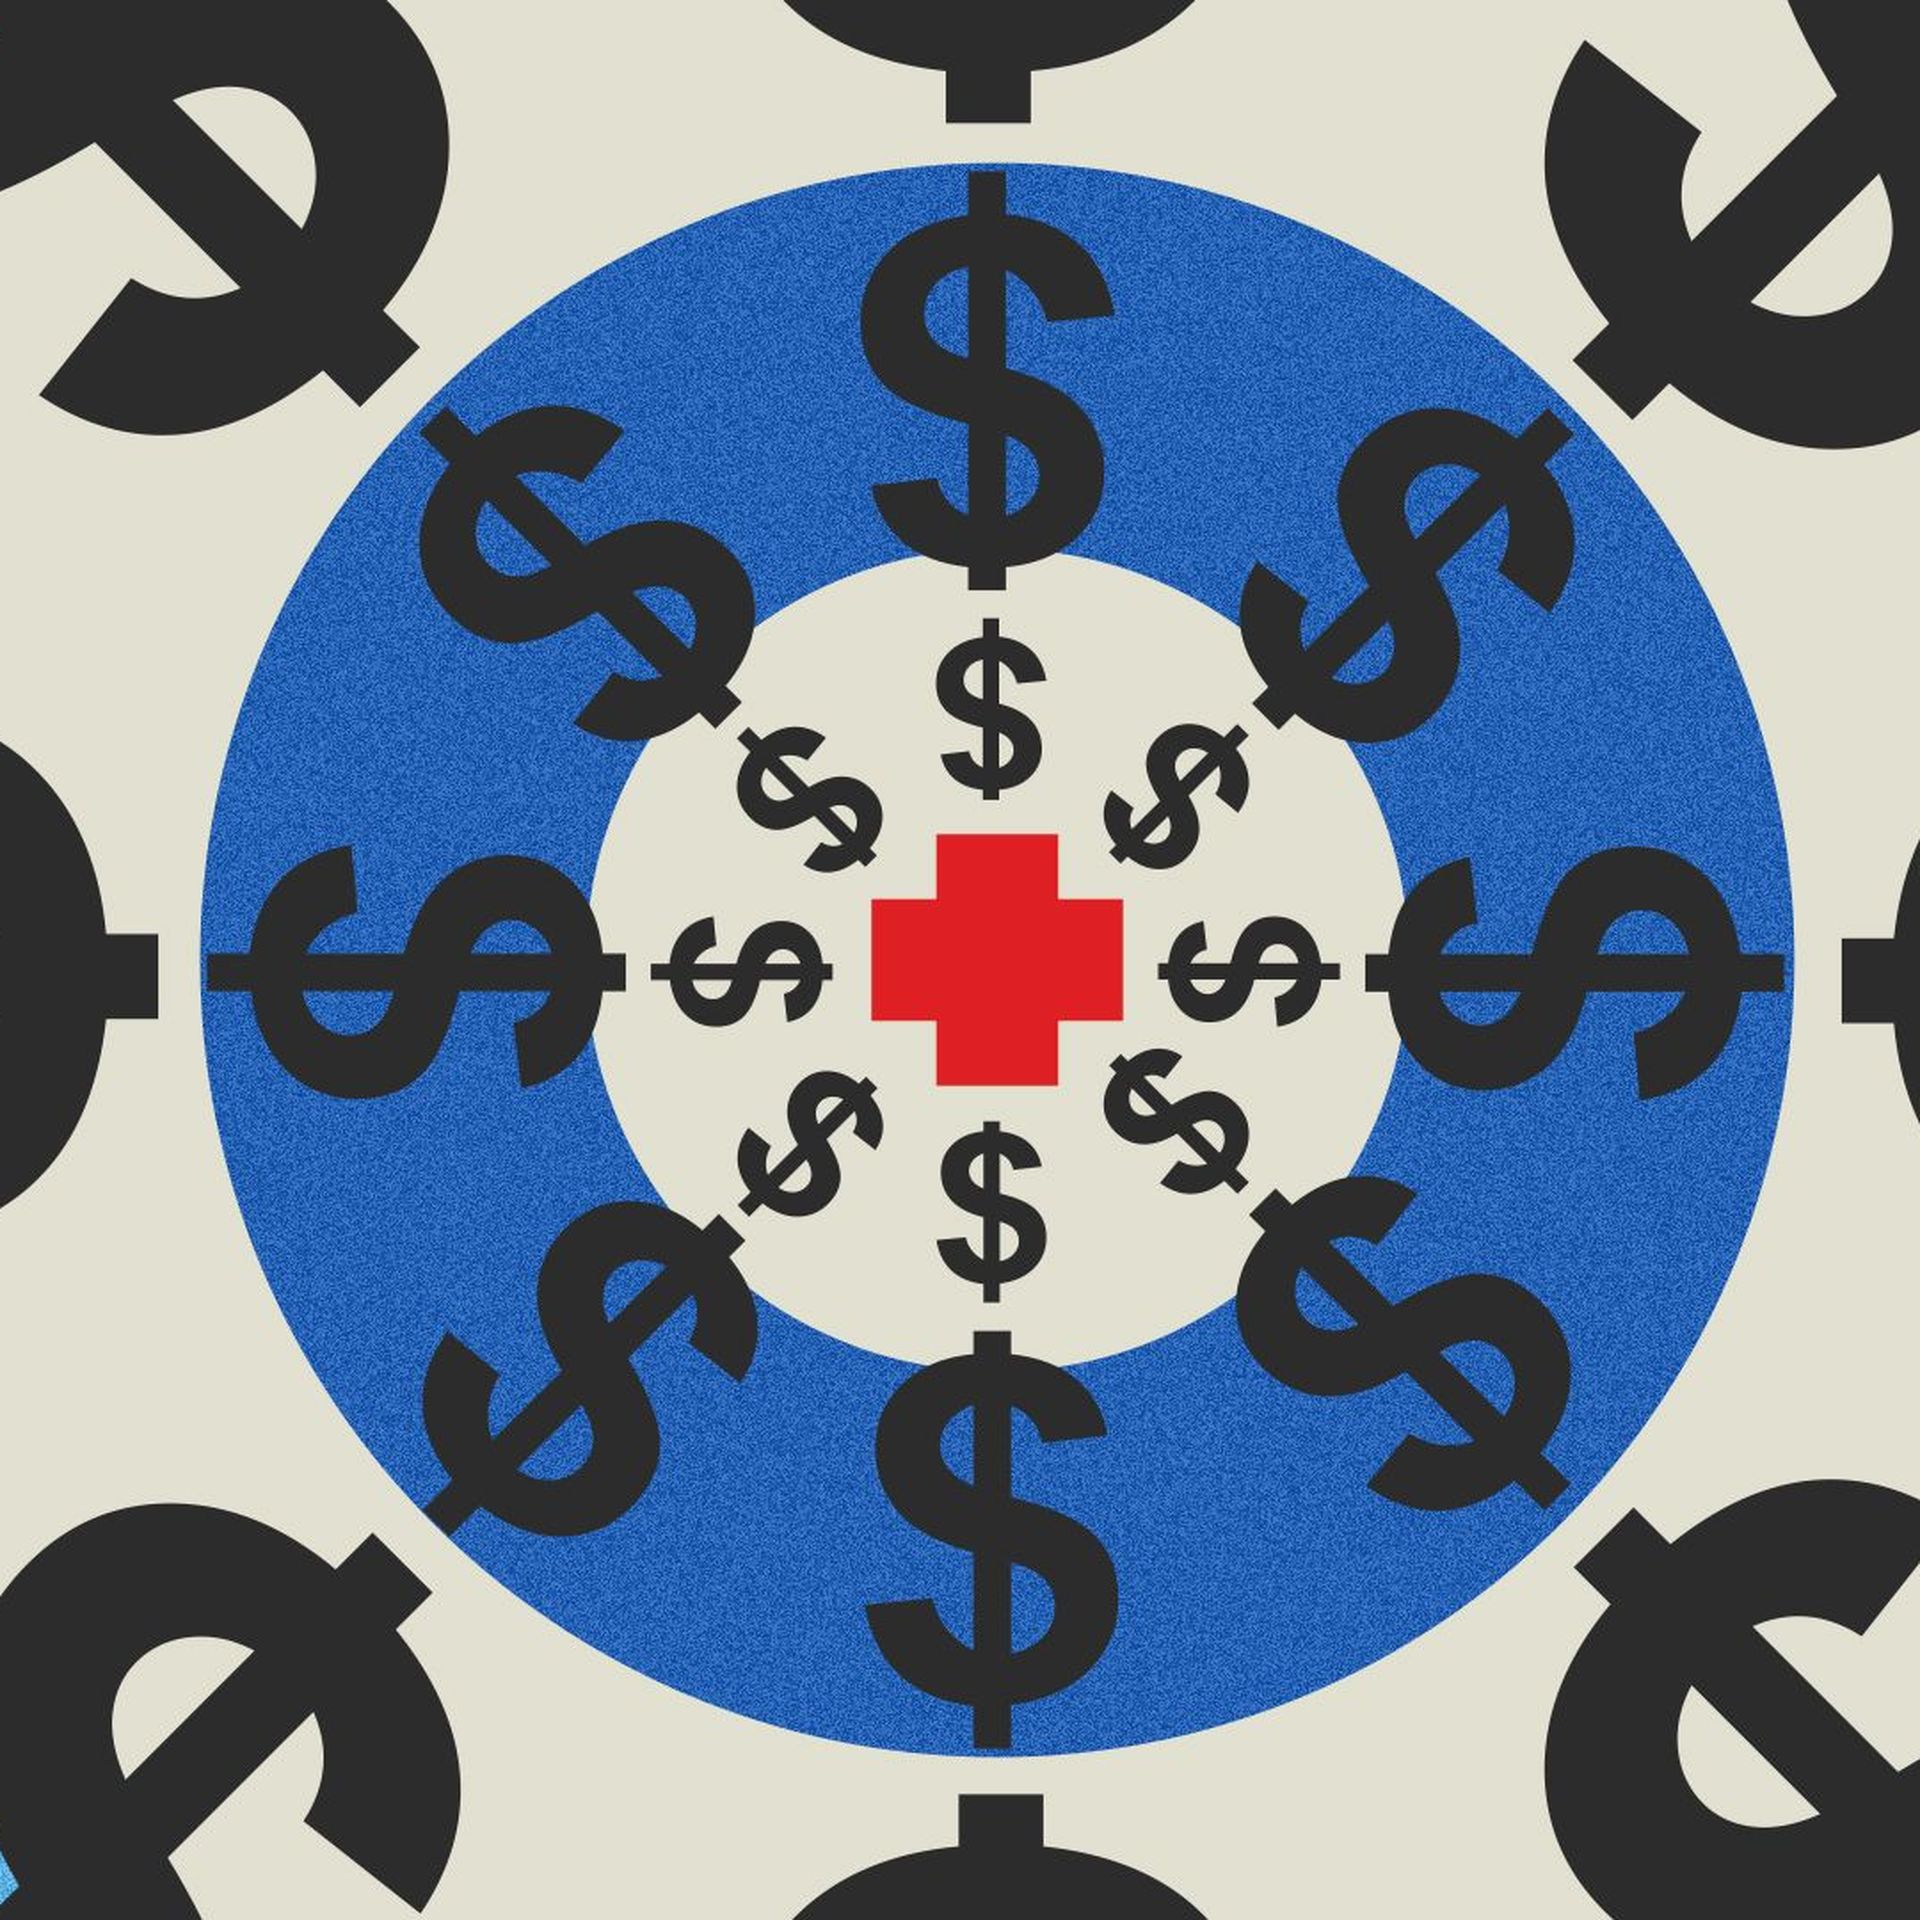 Illustration of red cross surrounded by concentric circles of dollar symbols.